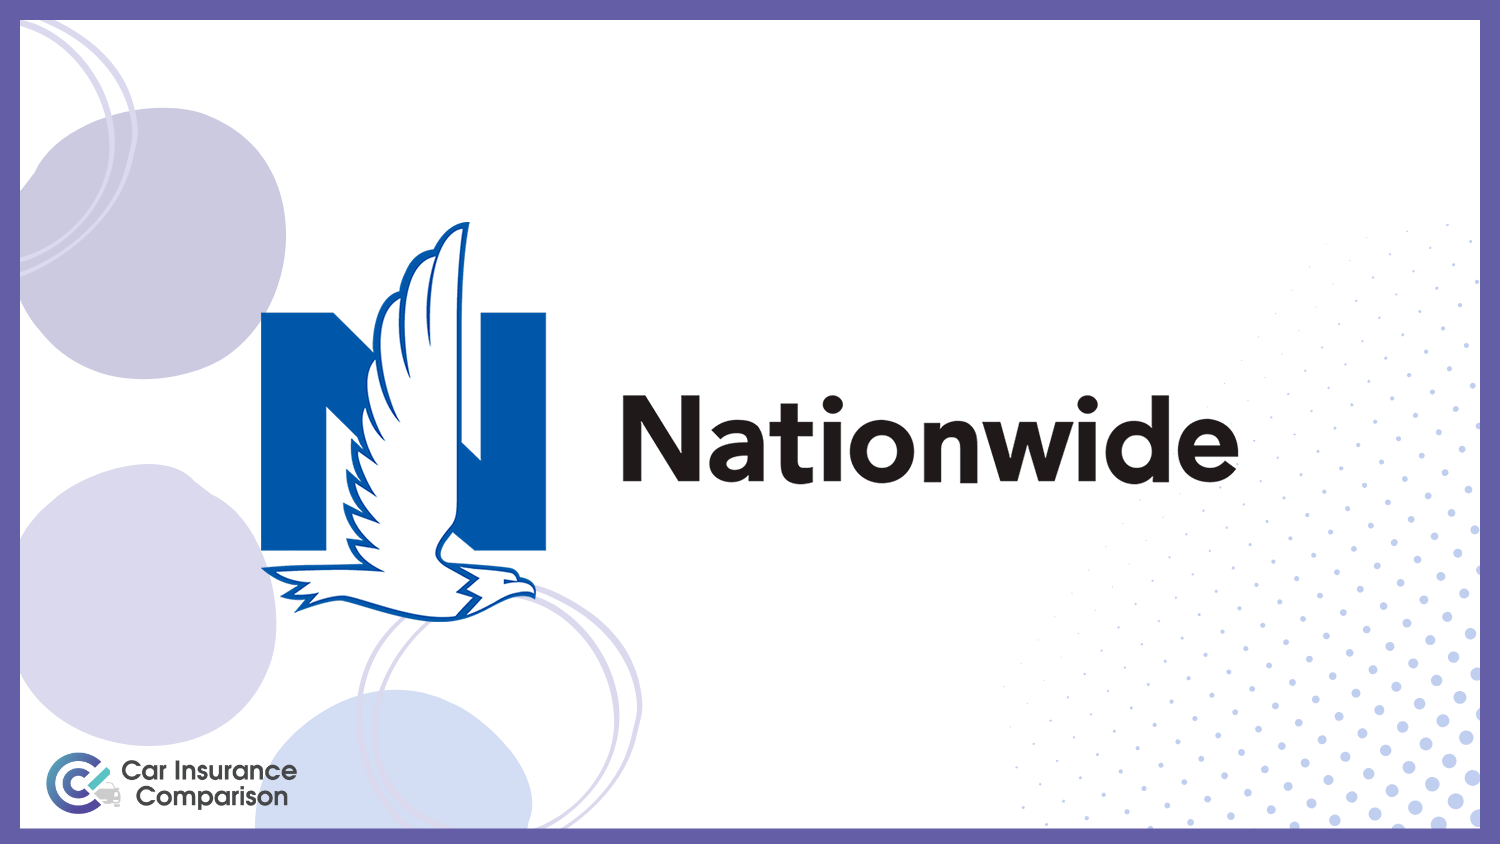 Nationwide: Compare Car Insurance Rates for First-time Drivers